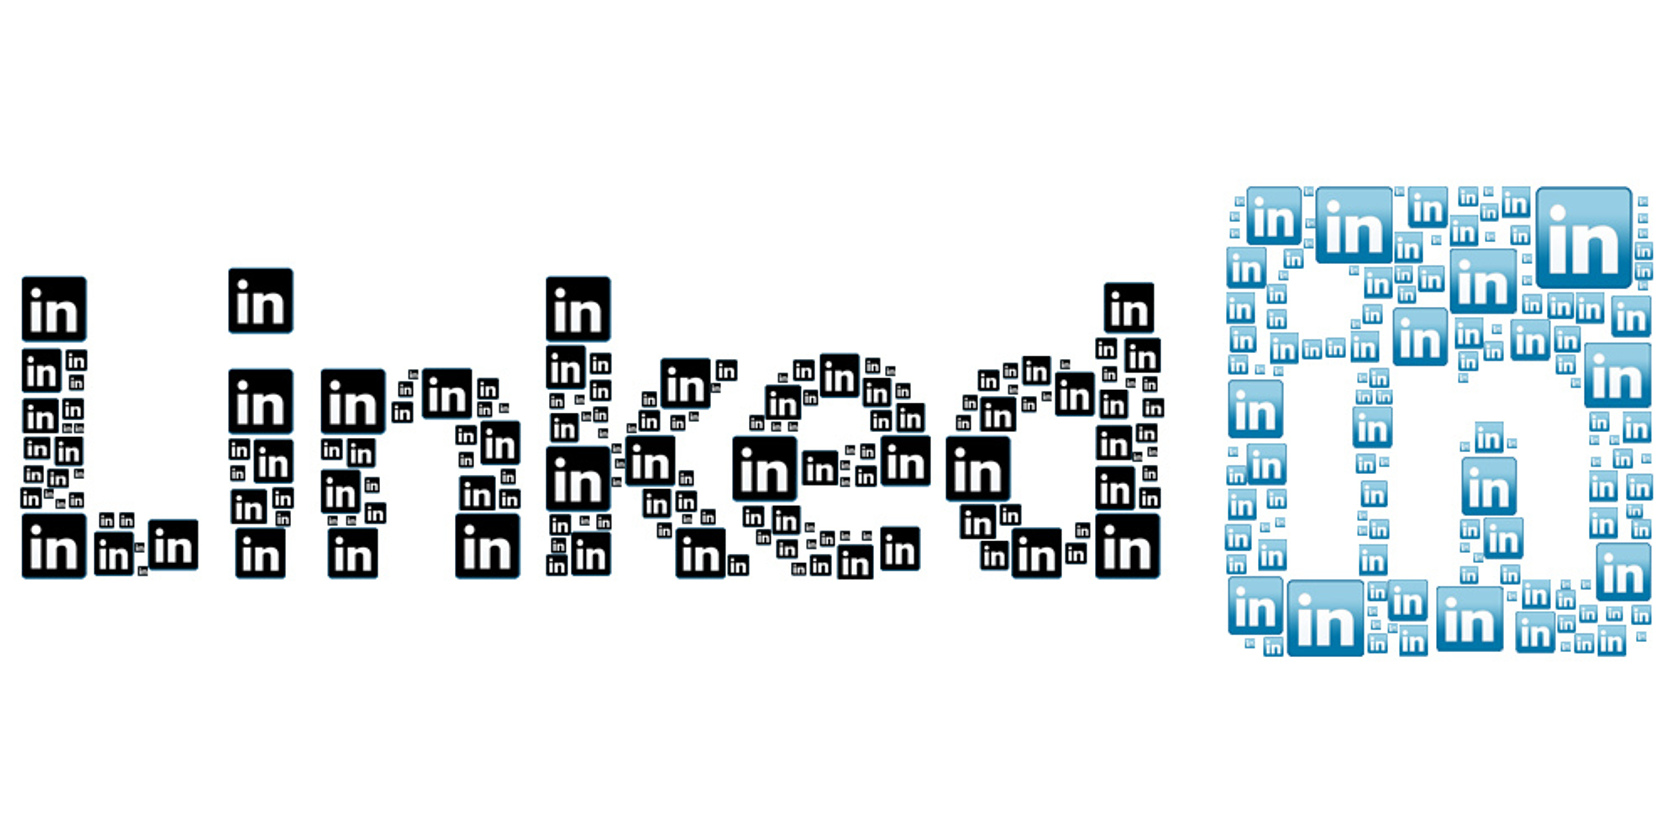 A collage of the LinkedIn logo made up together to write the LinkedIn logo